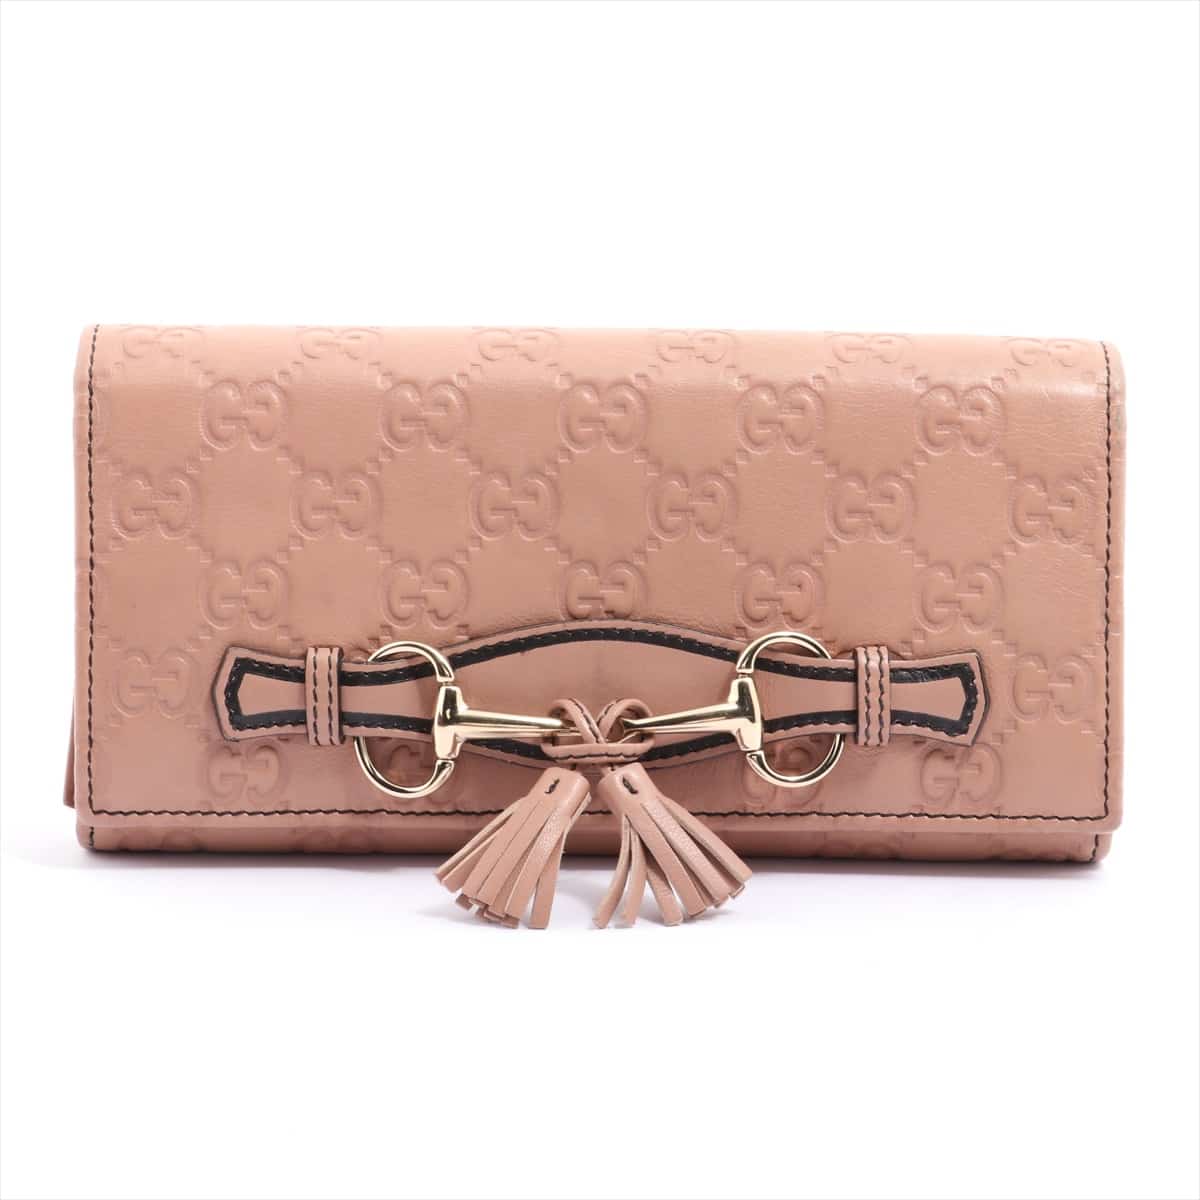 Gucci Guccissima Horsebit 295360 Leather Wallet Pink beige